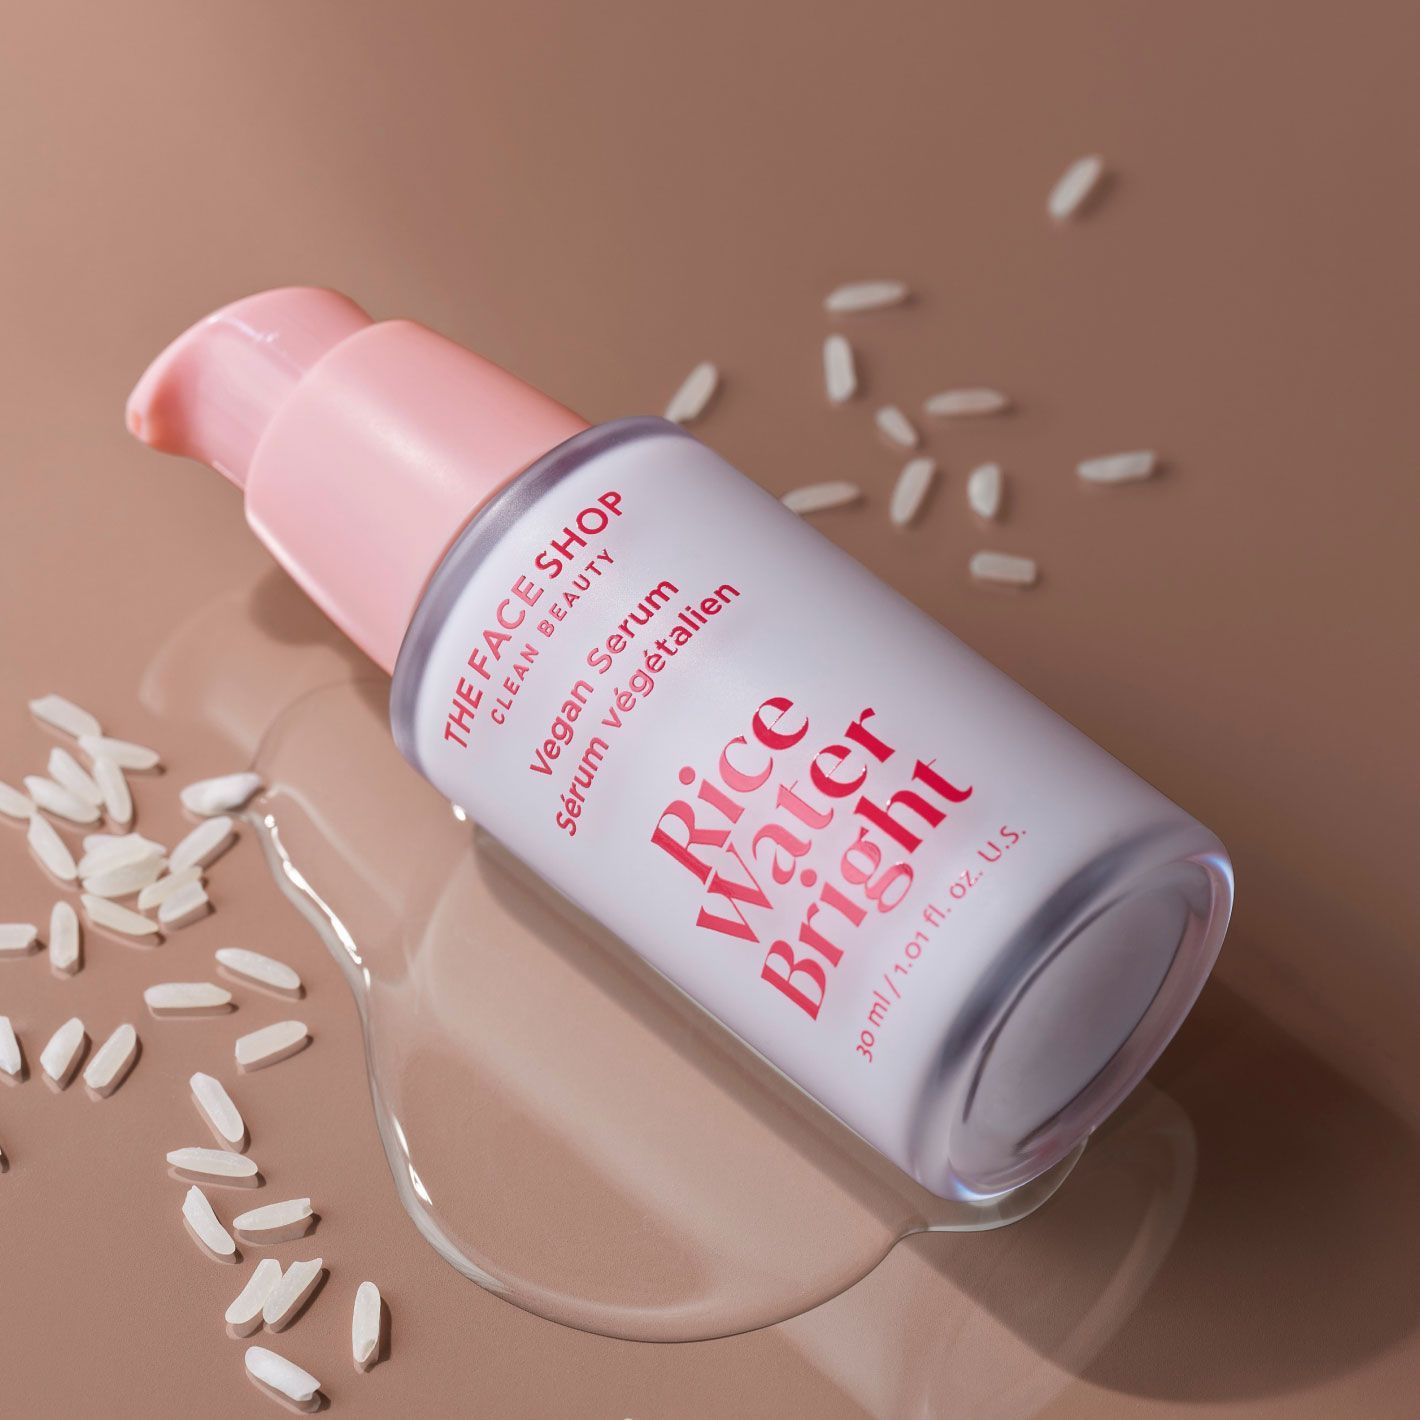 Glow up with Rice Water Bright Vegan Serum by LG Beauty